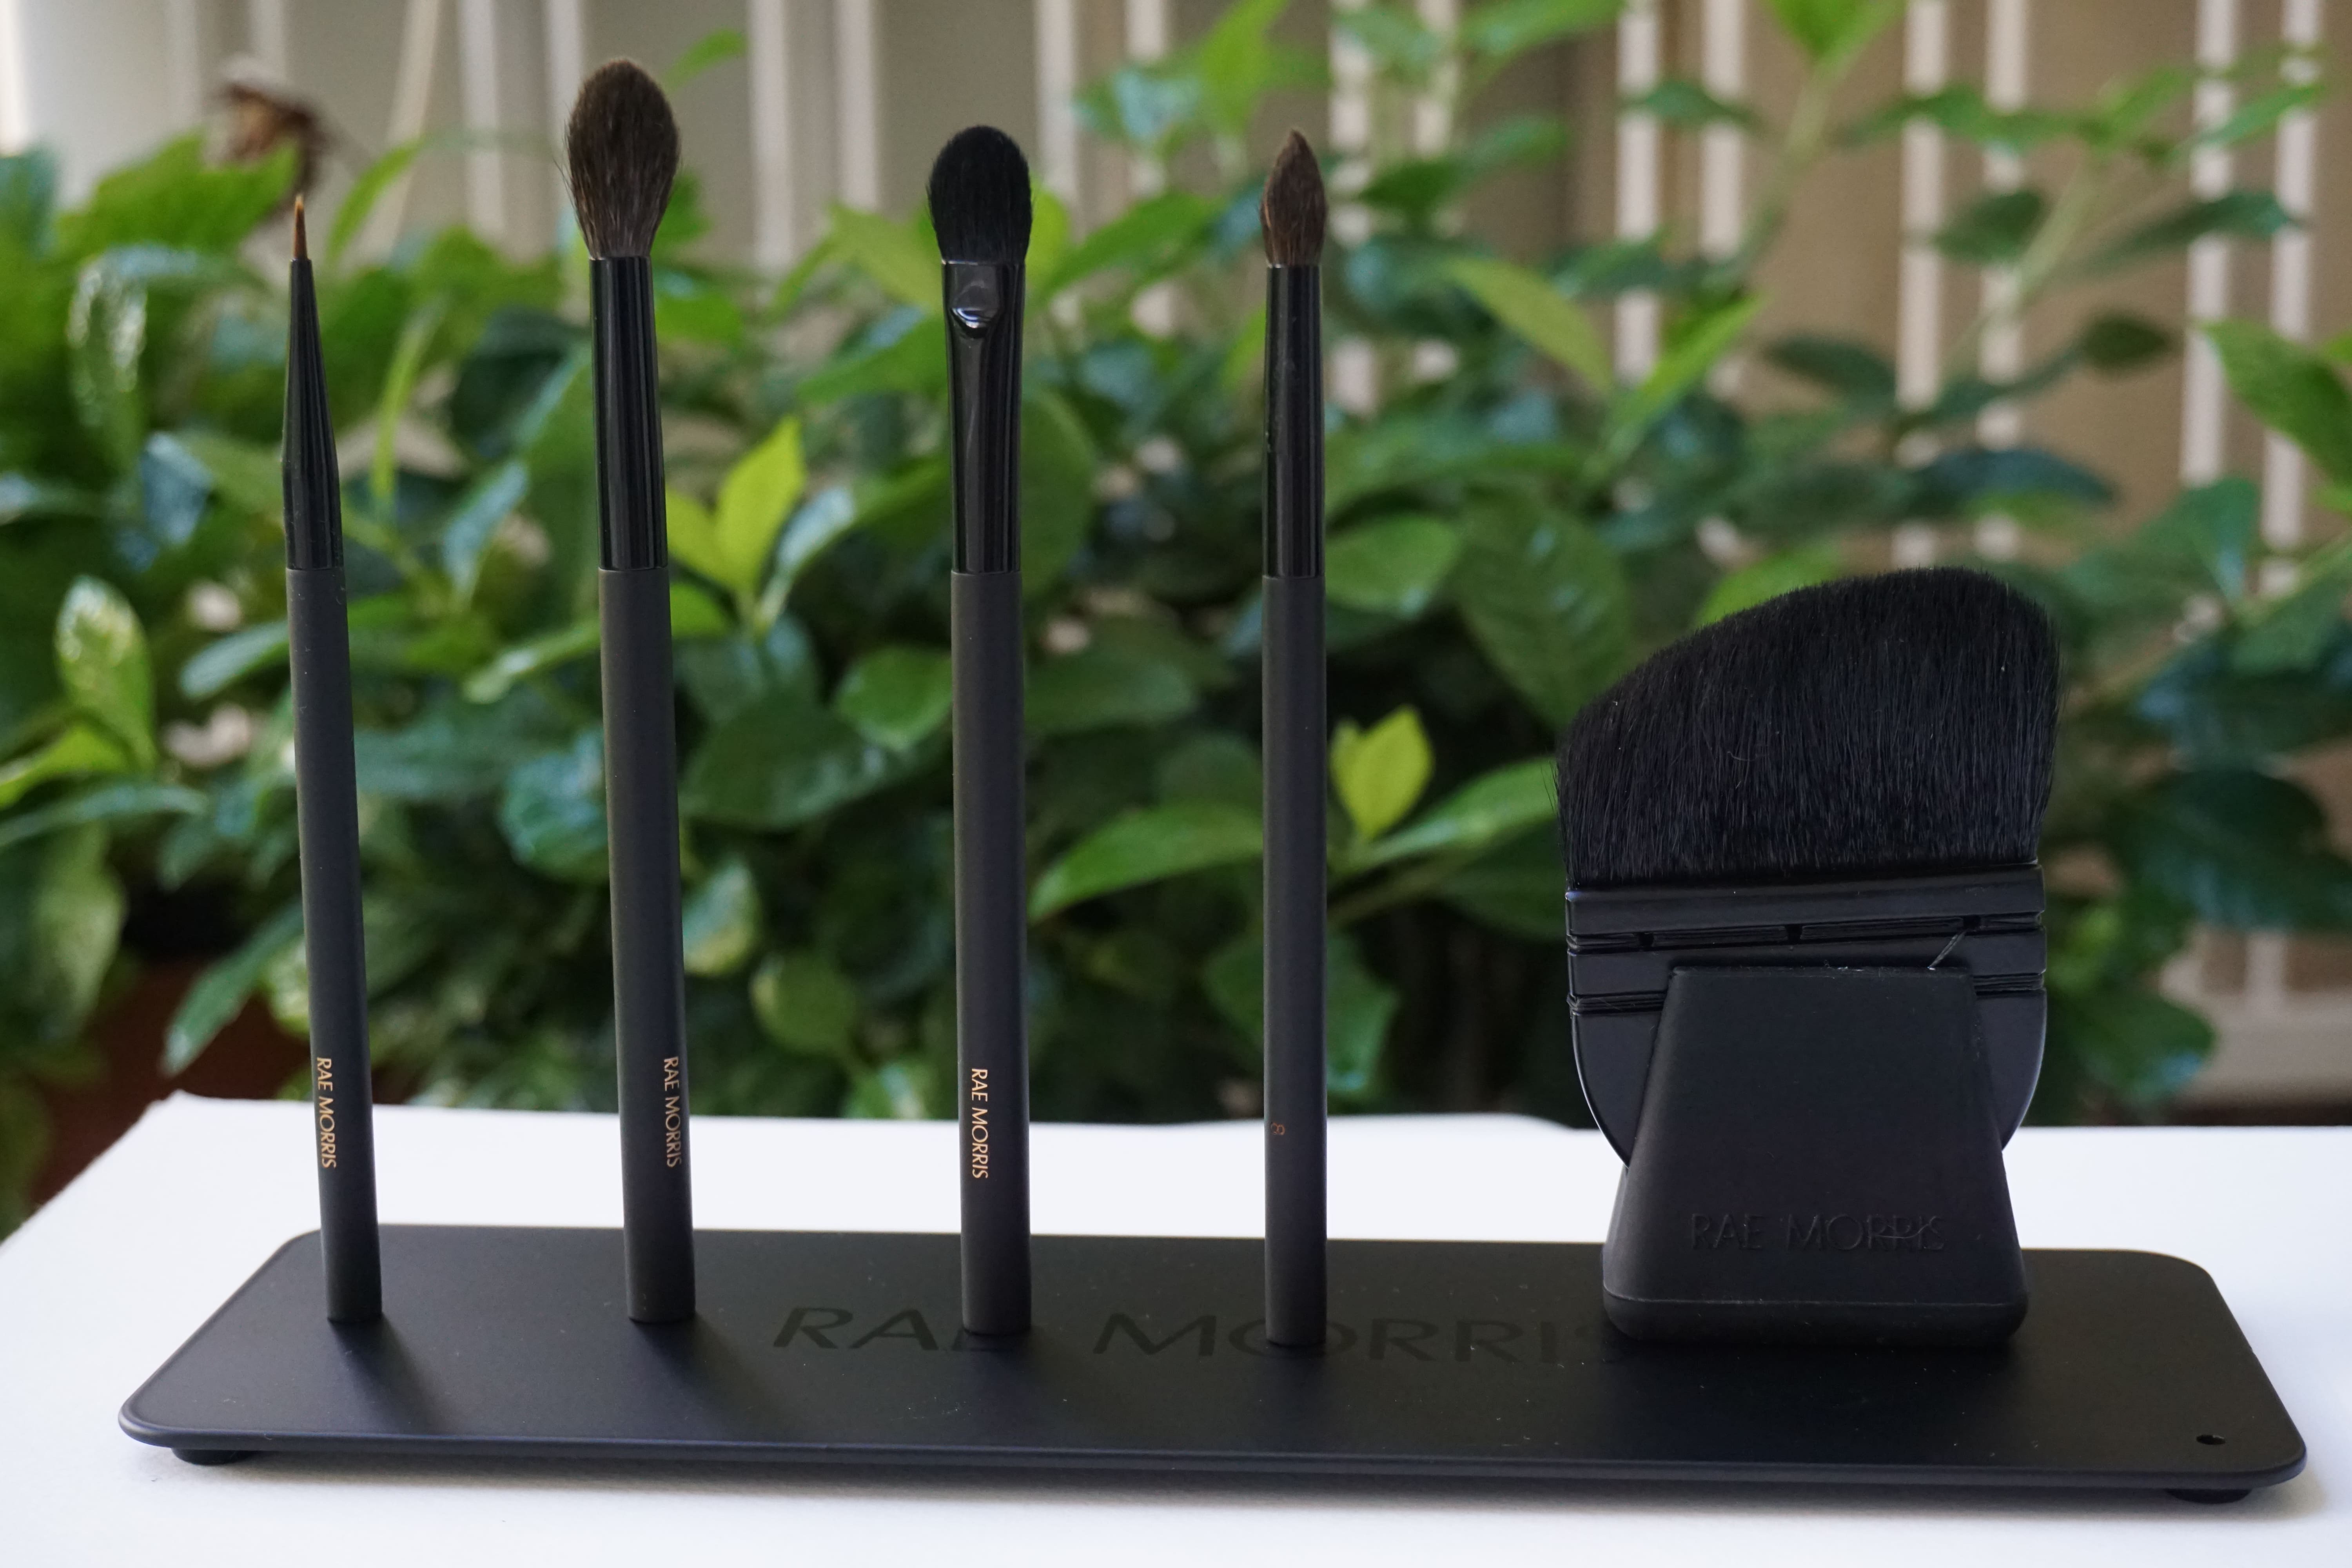 Rae Morris Brushes First Impressions